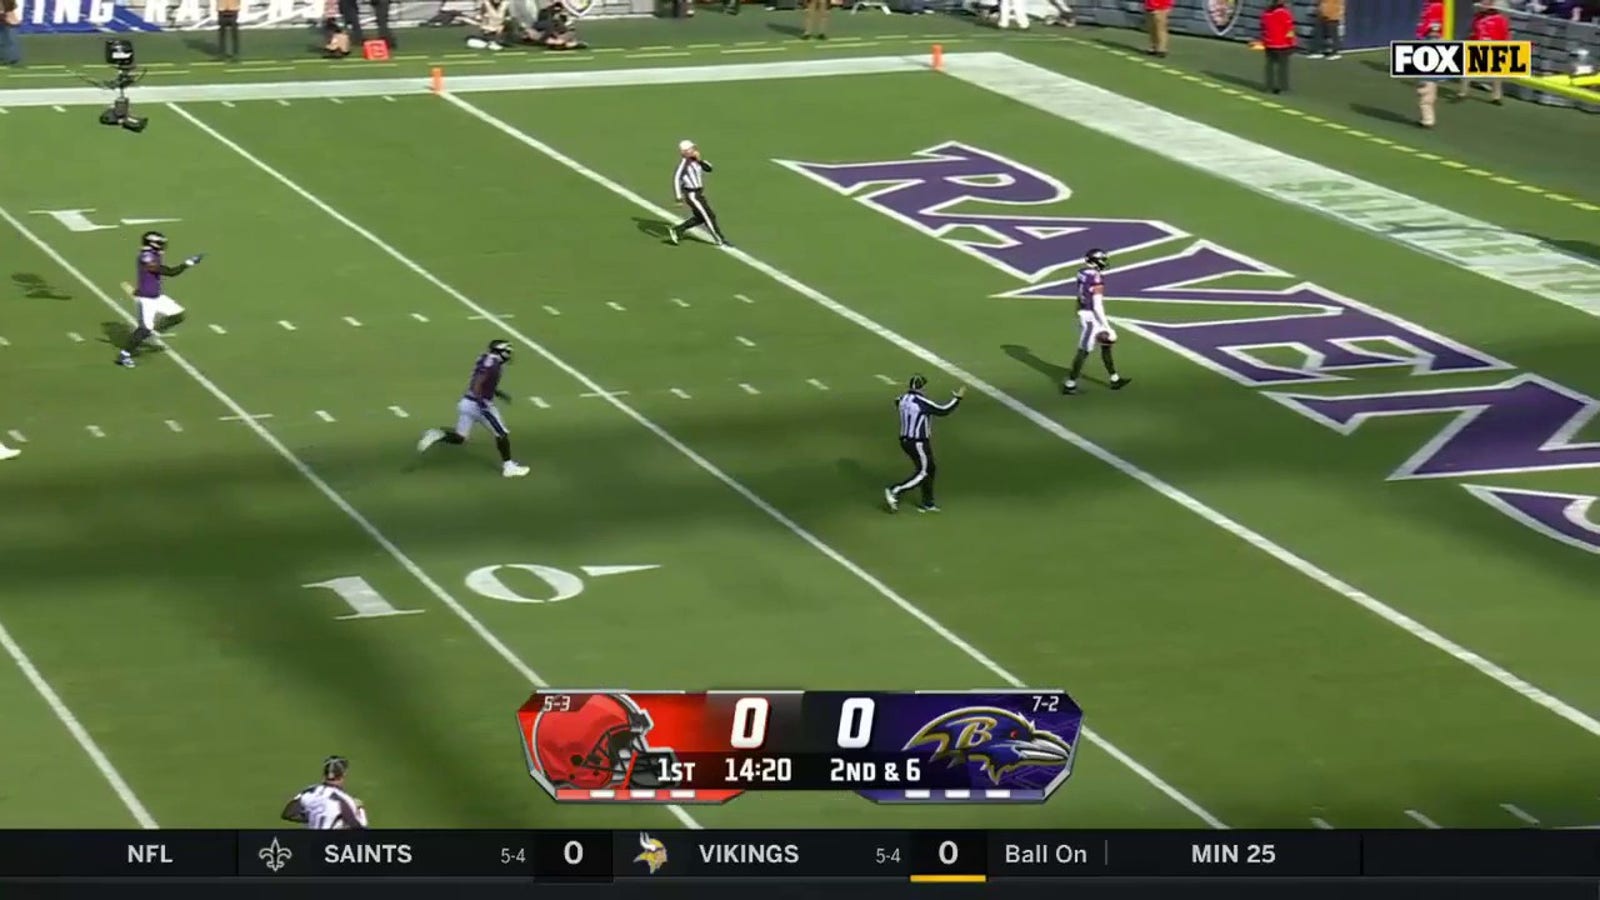 Ravens' Kyle Hamilton picks off Deshaun Watson and takes it 29 yards to the house for a TD